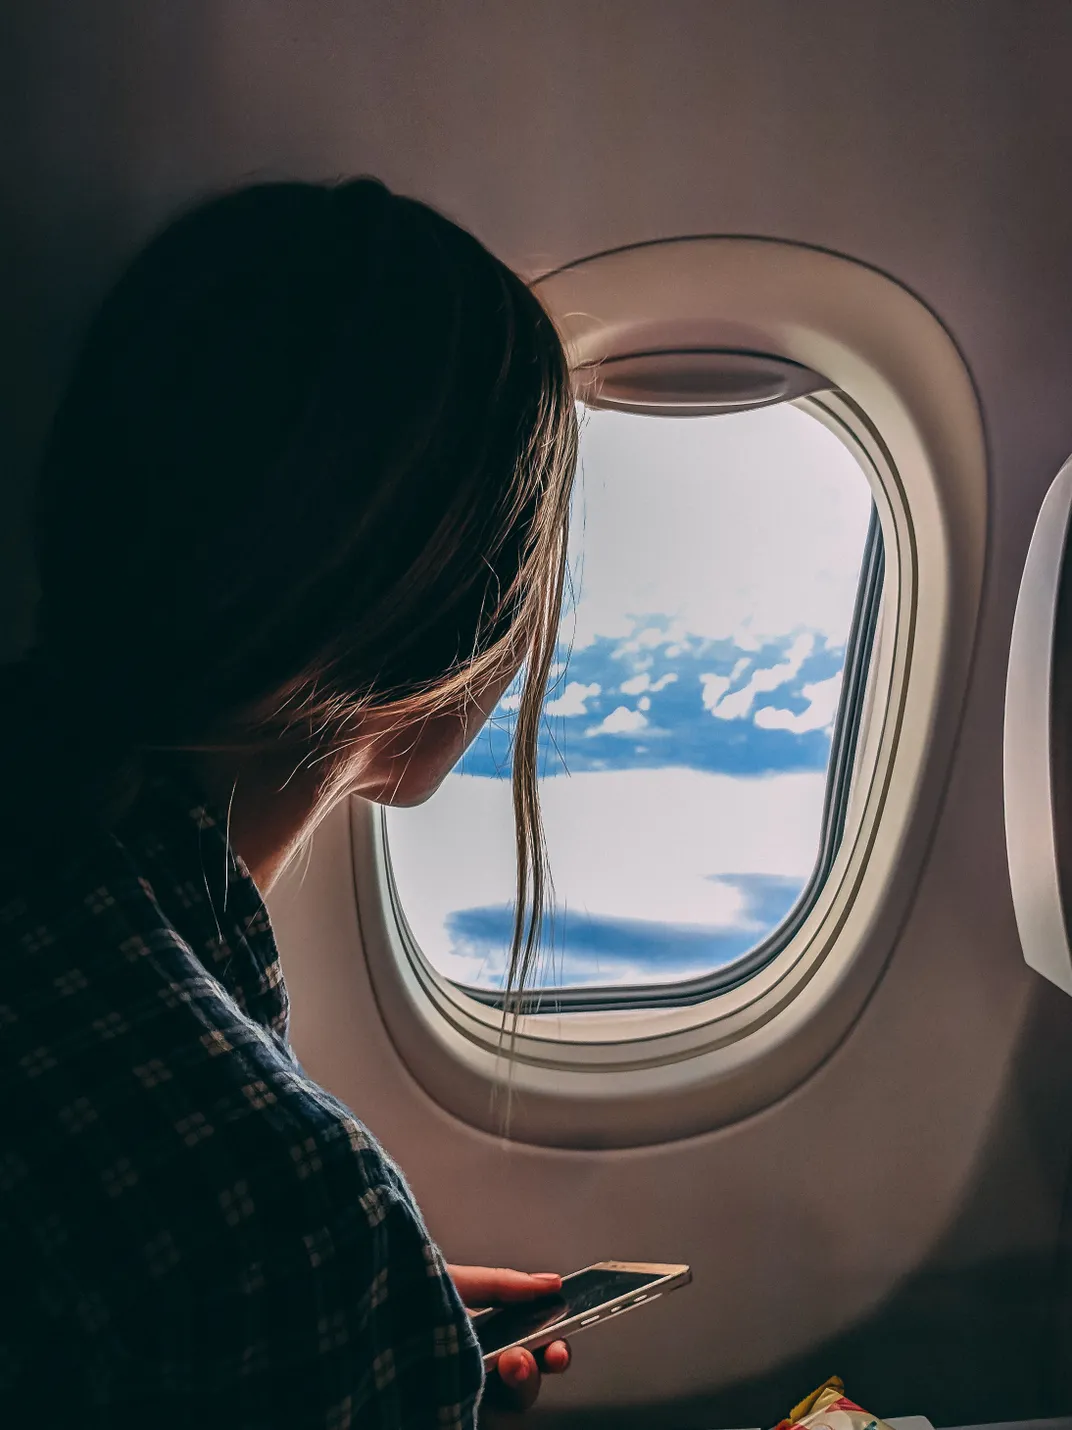 Girl looking out airplane window